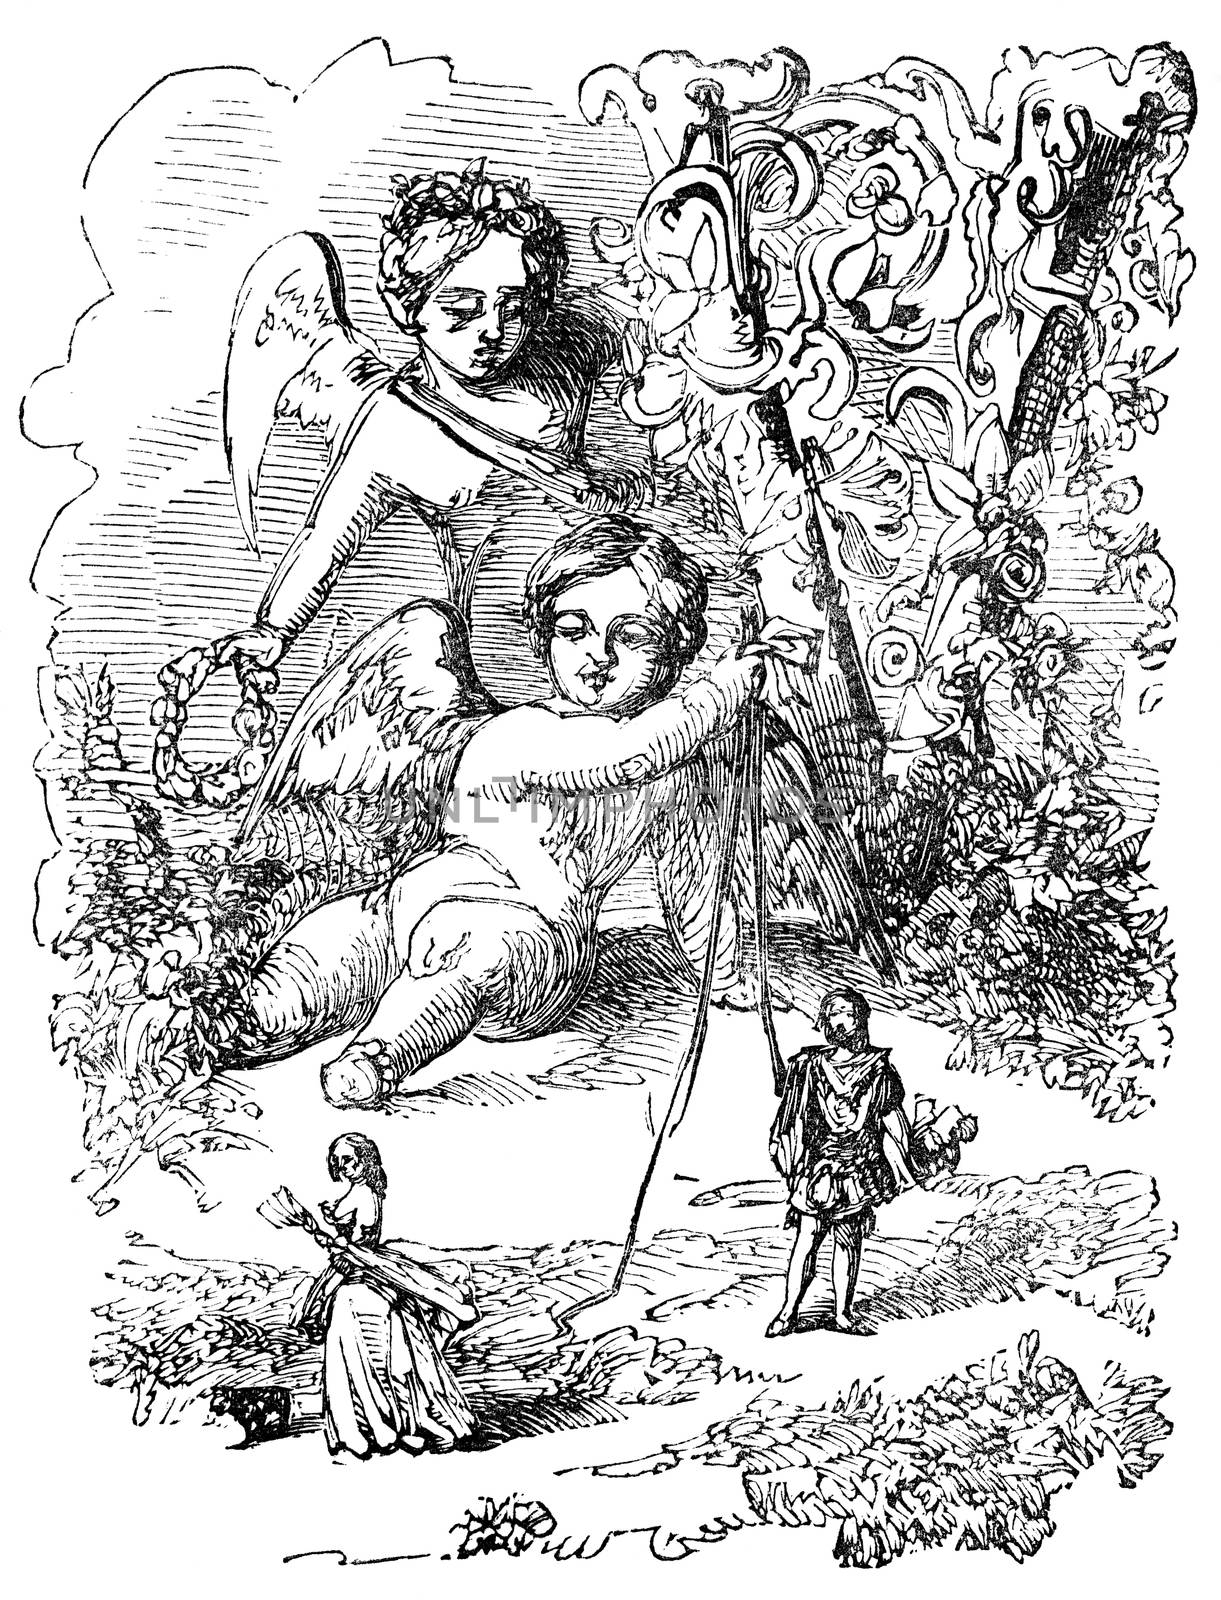 An engraved vintage romance love illustration image of the cherub Eros holding strings to draw lovers together, on St Valentine's Day, from a Victorian book dated 1883 that is no longer in copyright